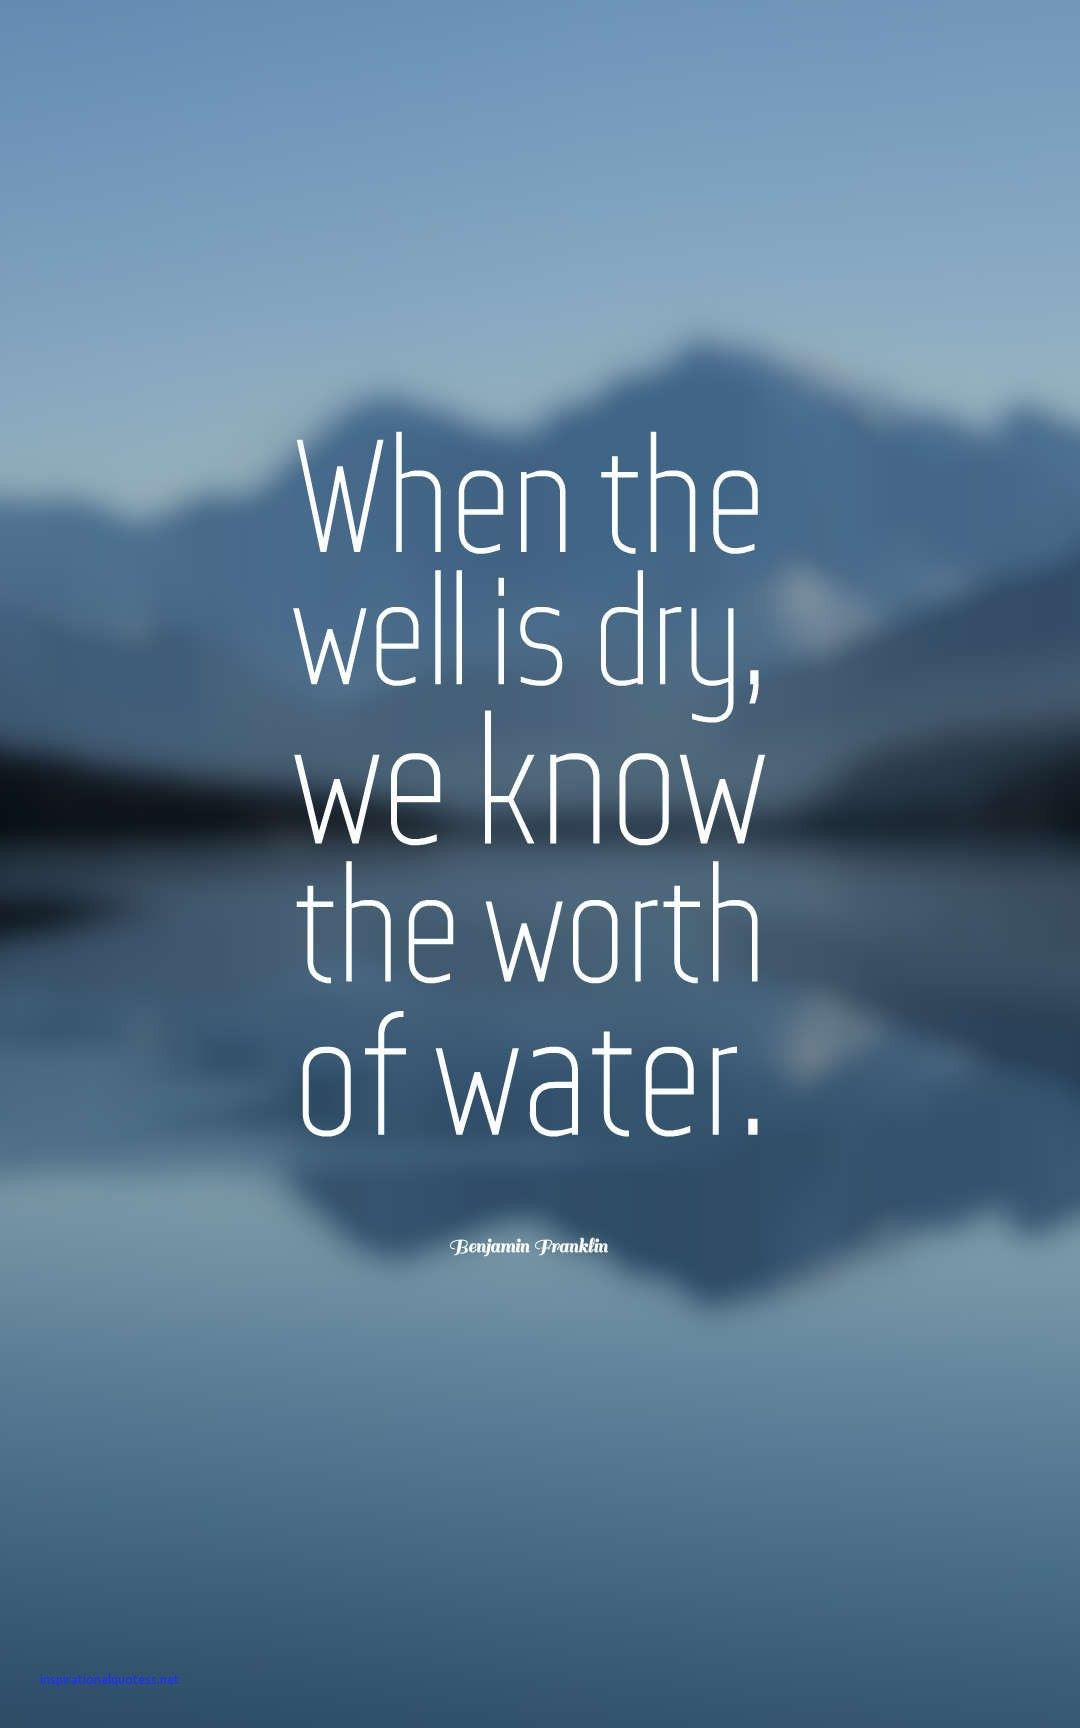 Inspirational And Motivational Quotes
 Inspirational Water Quotes in 2019